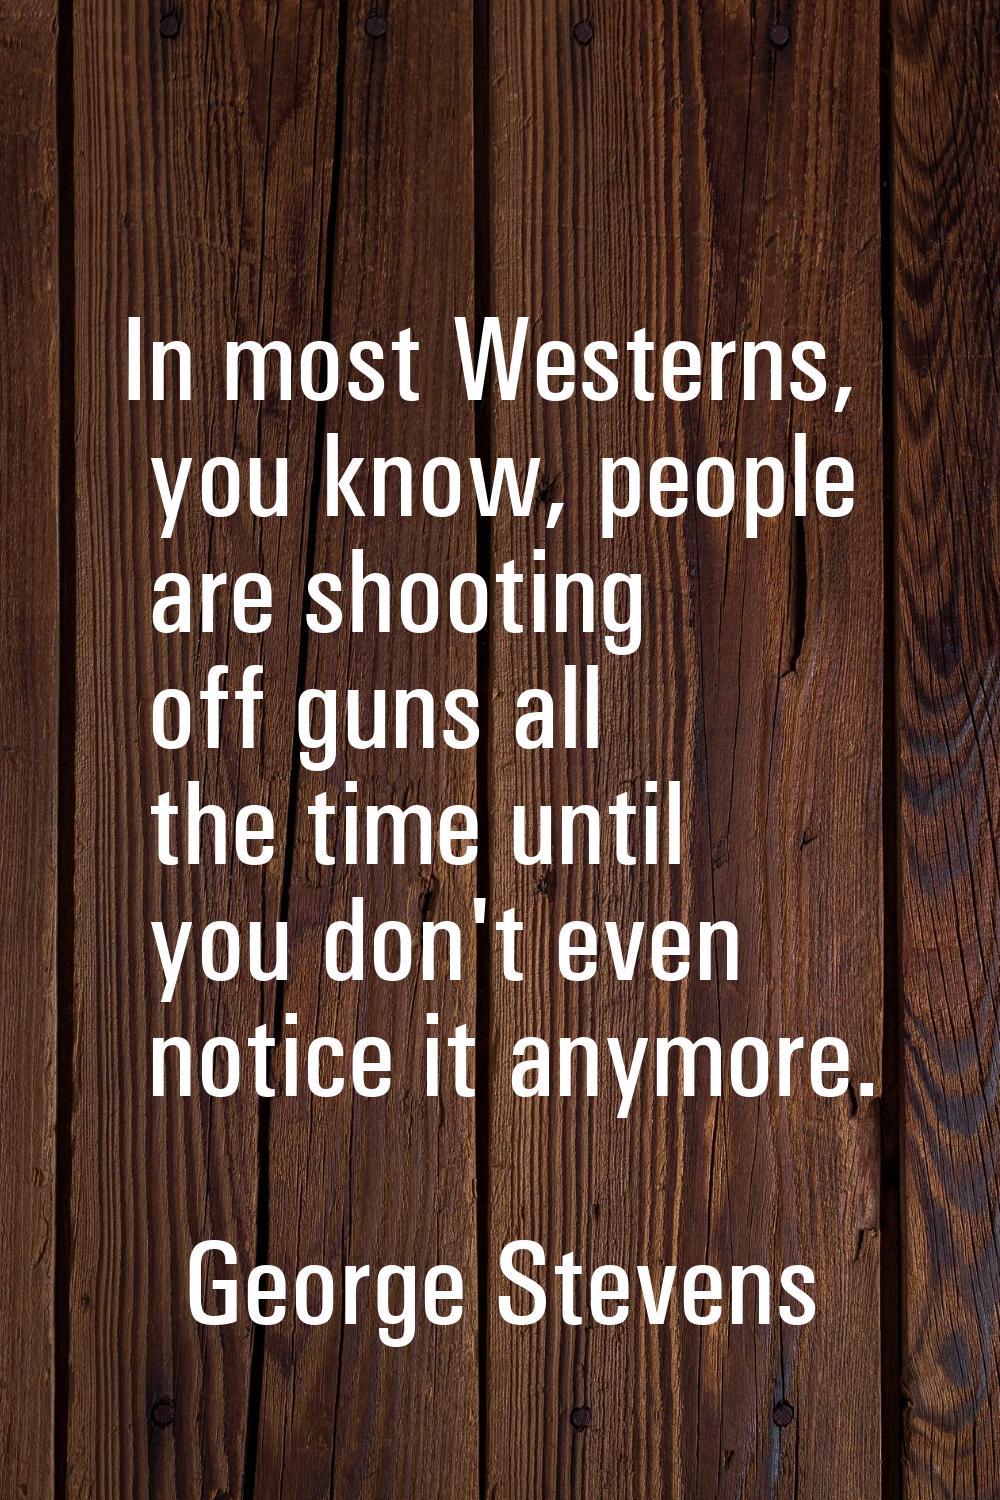 In most Westerns, you know, people are shooting off guns all the time until you don't even notice i